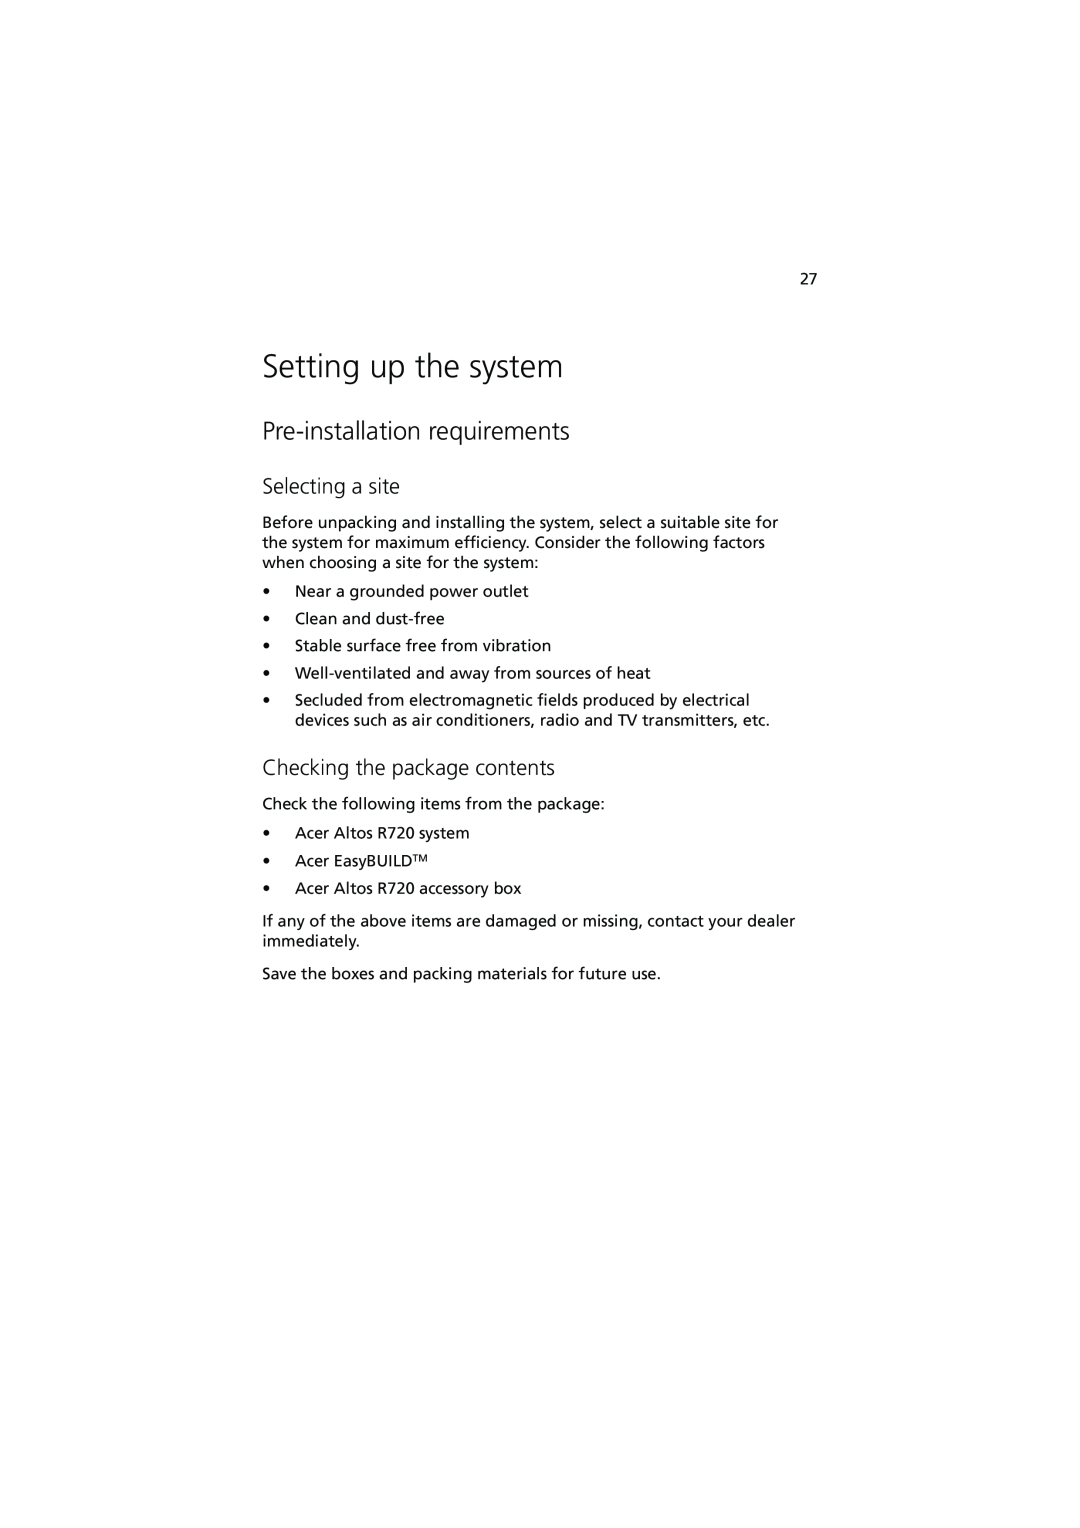 Acer R720 Series Setting up the system, Pre-installation requirements, Selecting a site, Checking the package contents 